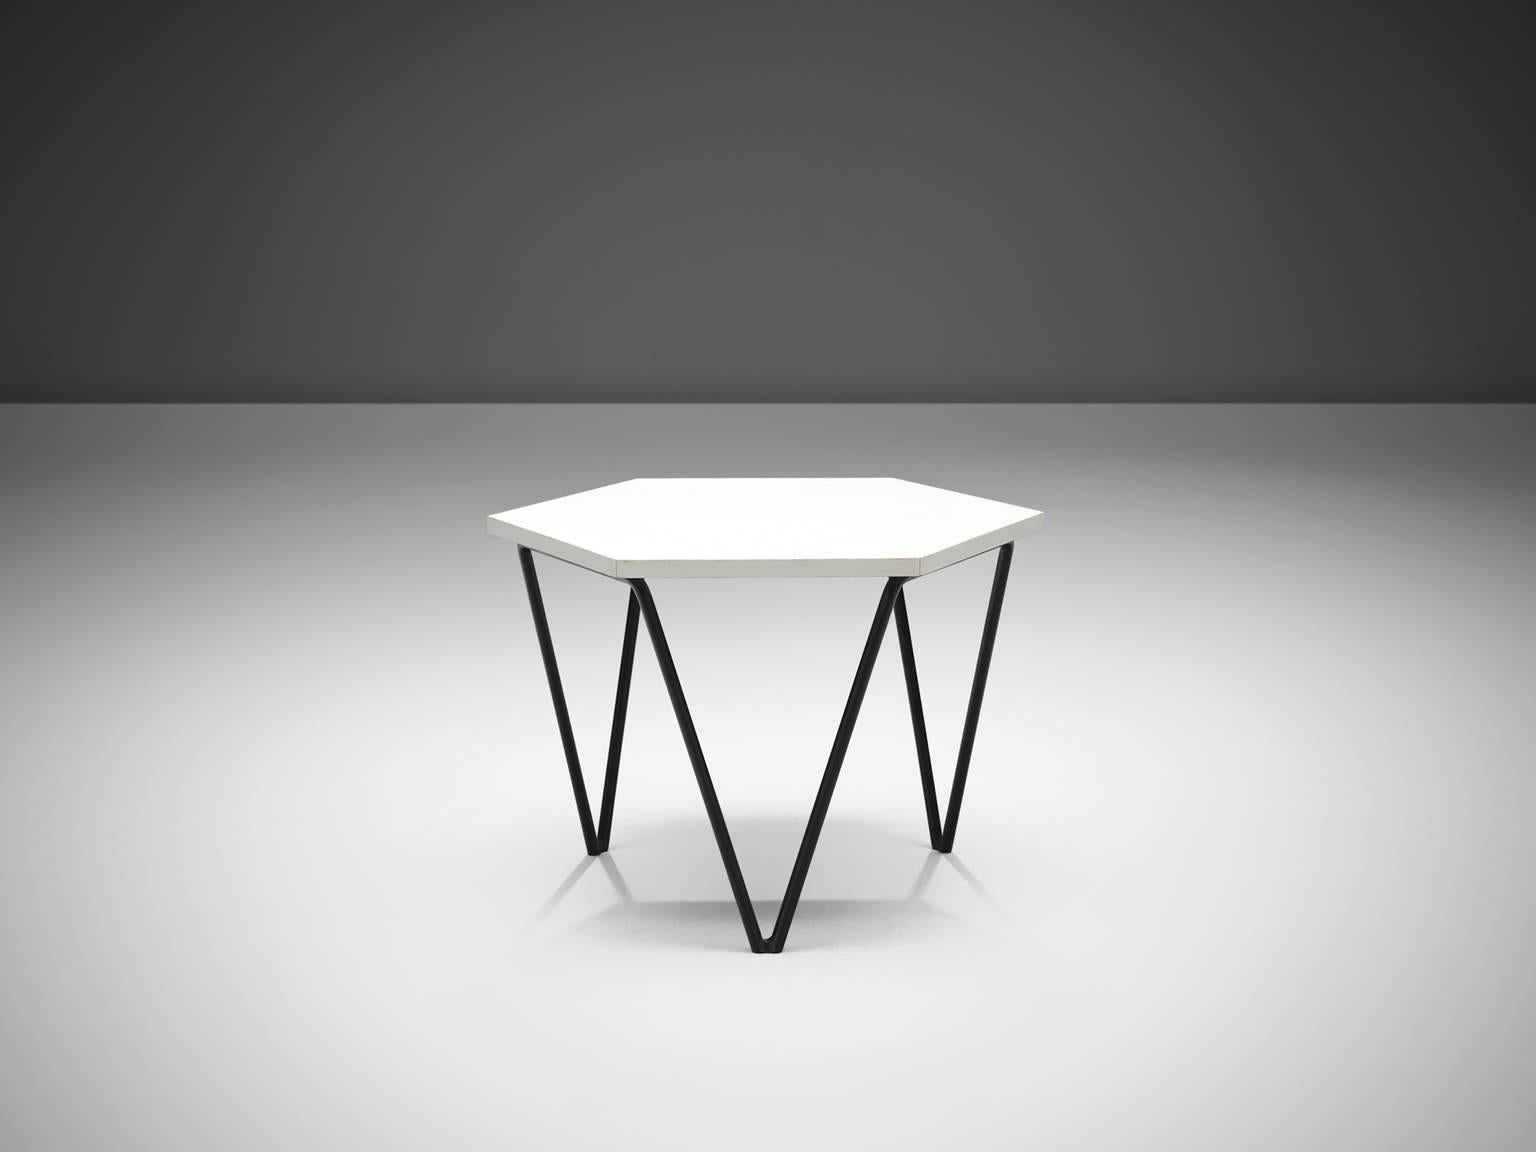 Gio Ponti for ISA, side table in white, black metal frame, Italy, 1950s.

This side table designed by Gio Ponti has a honeycomb shape and three triangular legs. The metal base has their original patina, tabletop is made out of white coated wood.